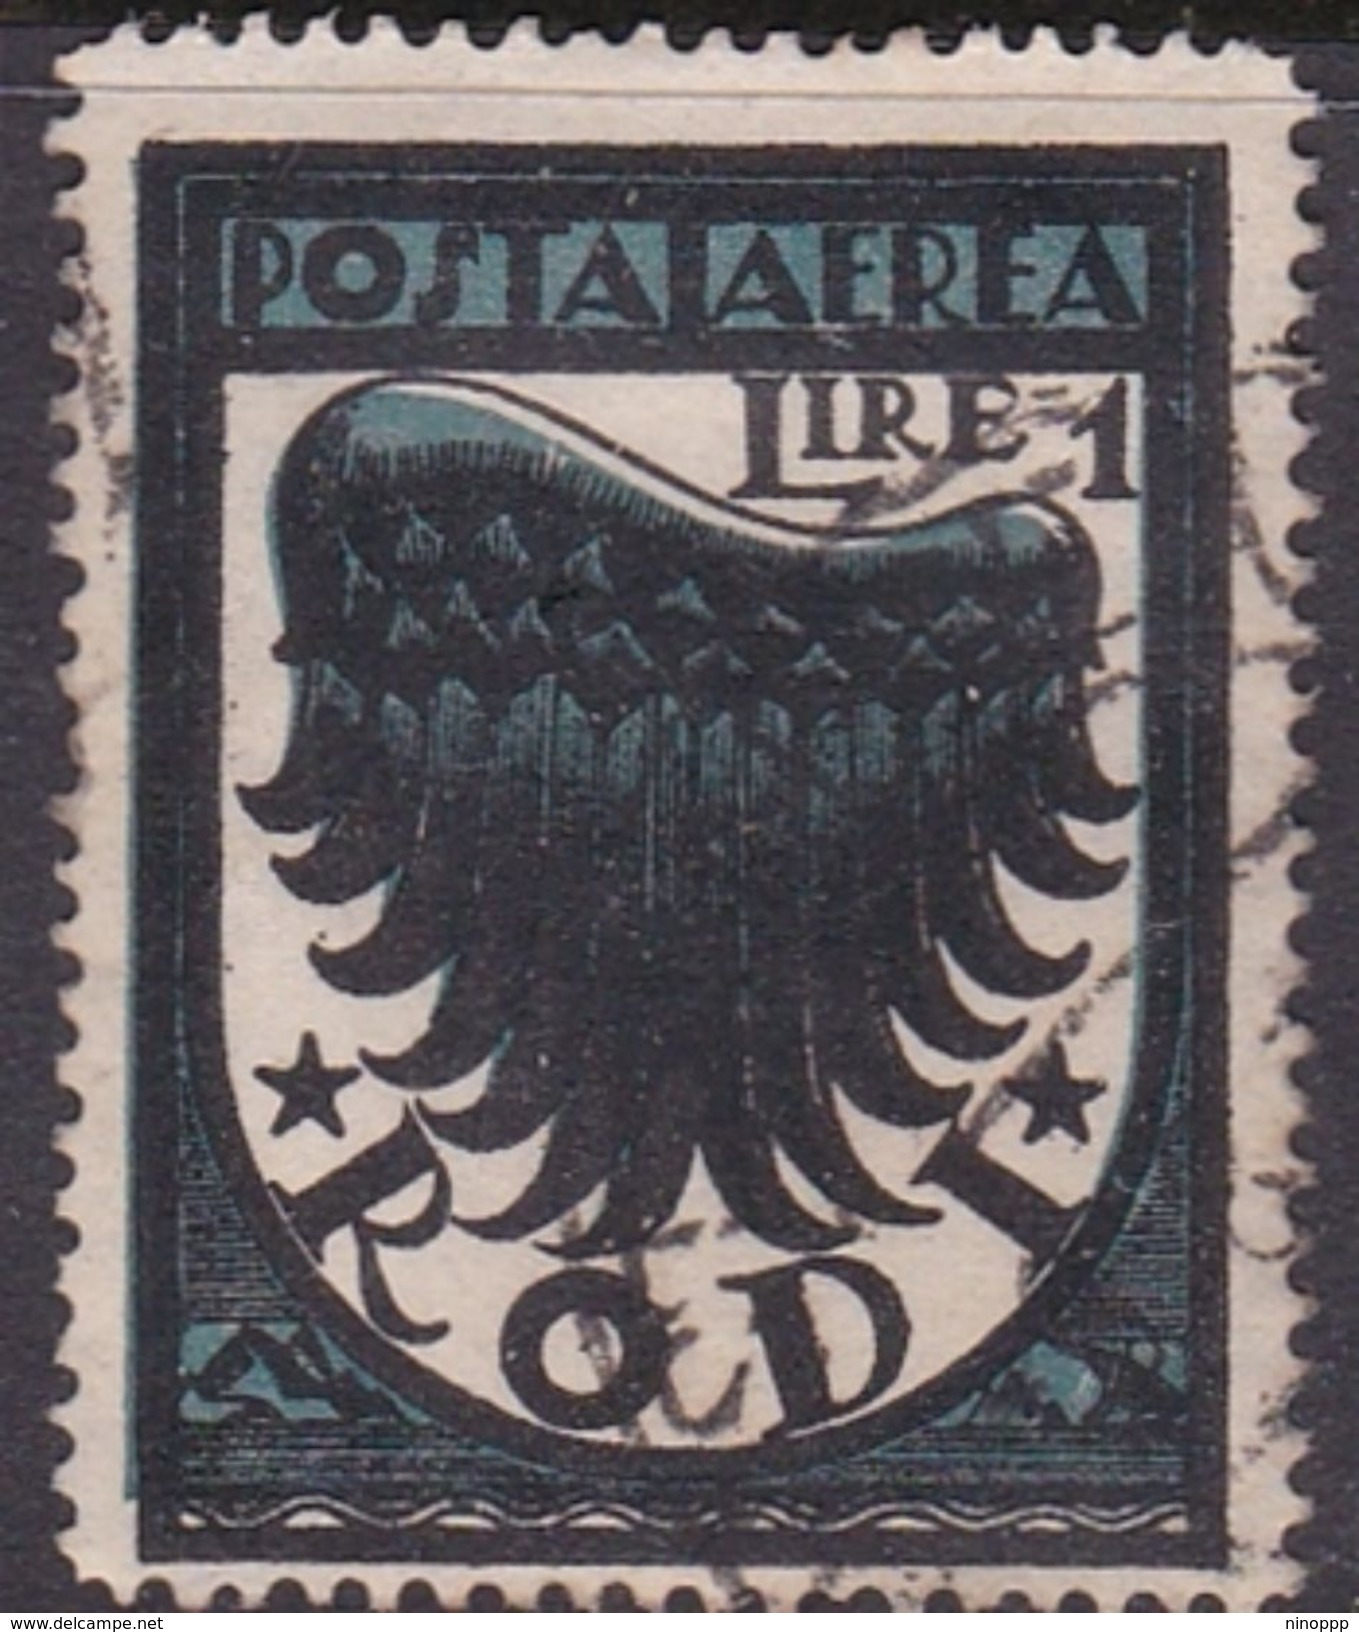 Italy-Colonies And Territories-Aegean General Issue-Rodi A32 1932 Air Mail Wing 1 Lira Black And Blue Used - Emissions Générales